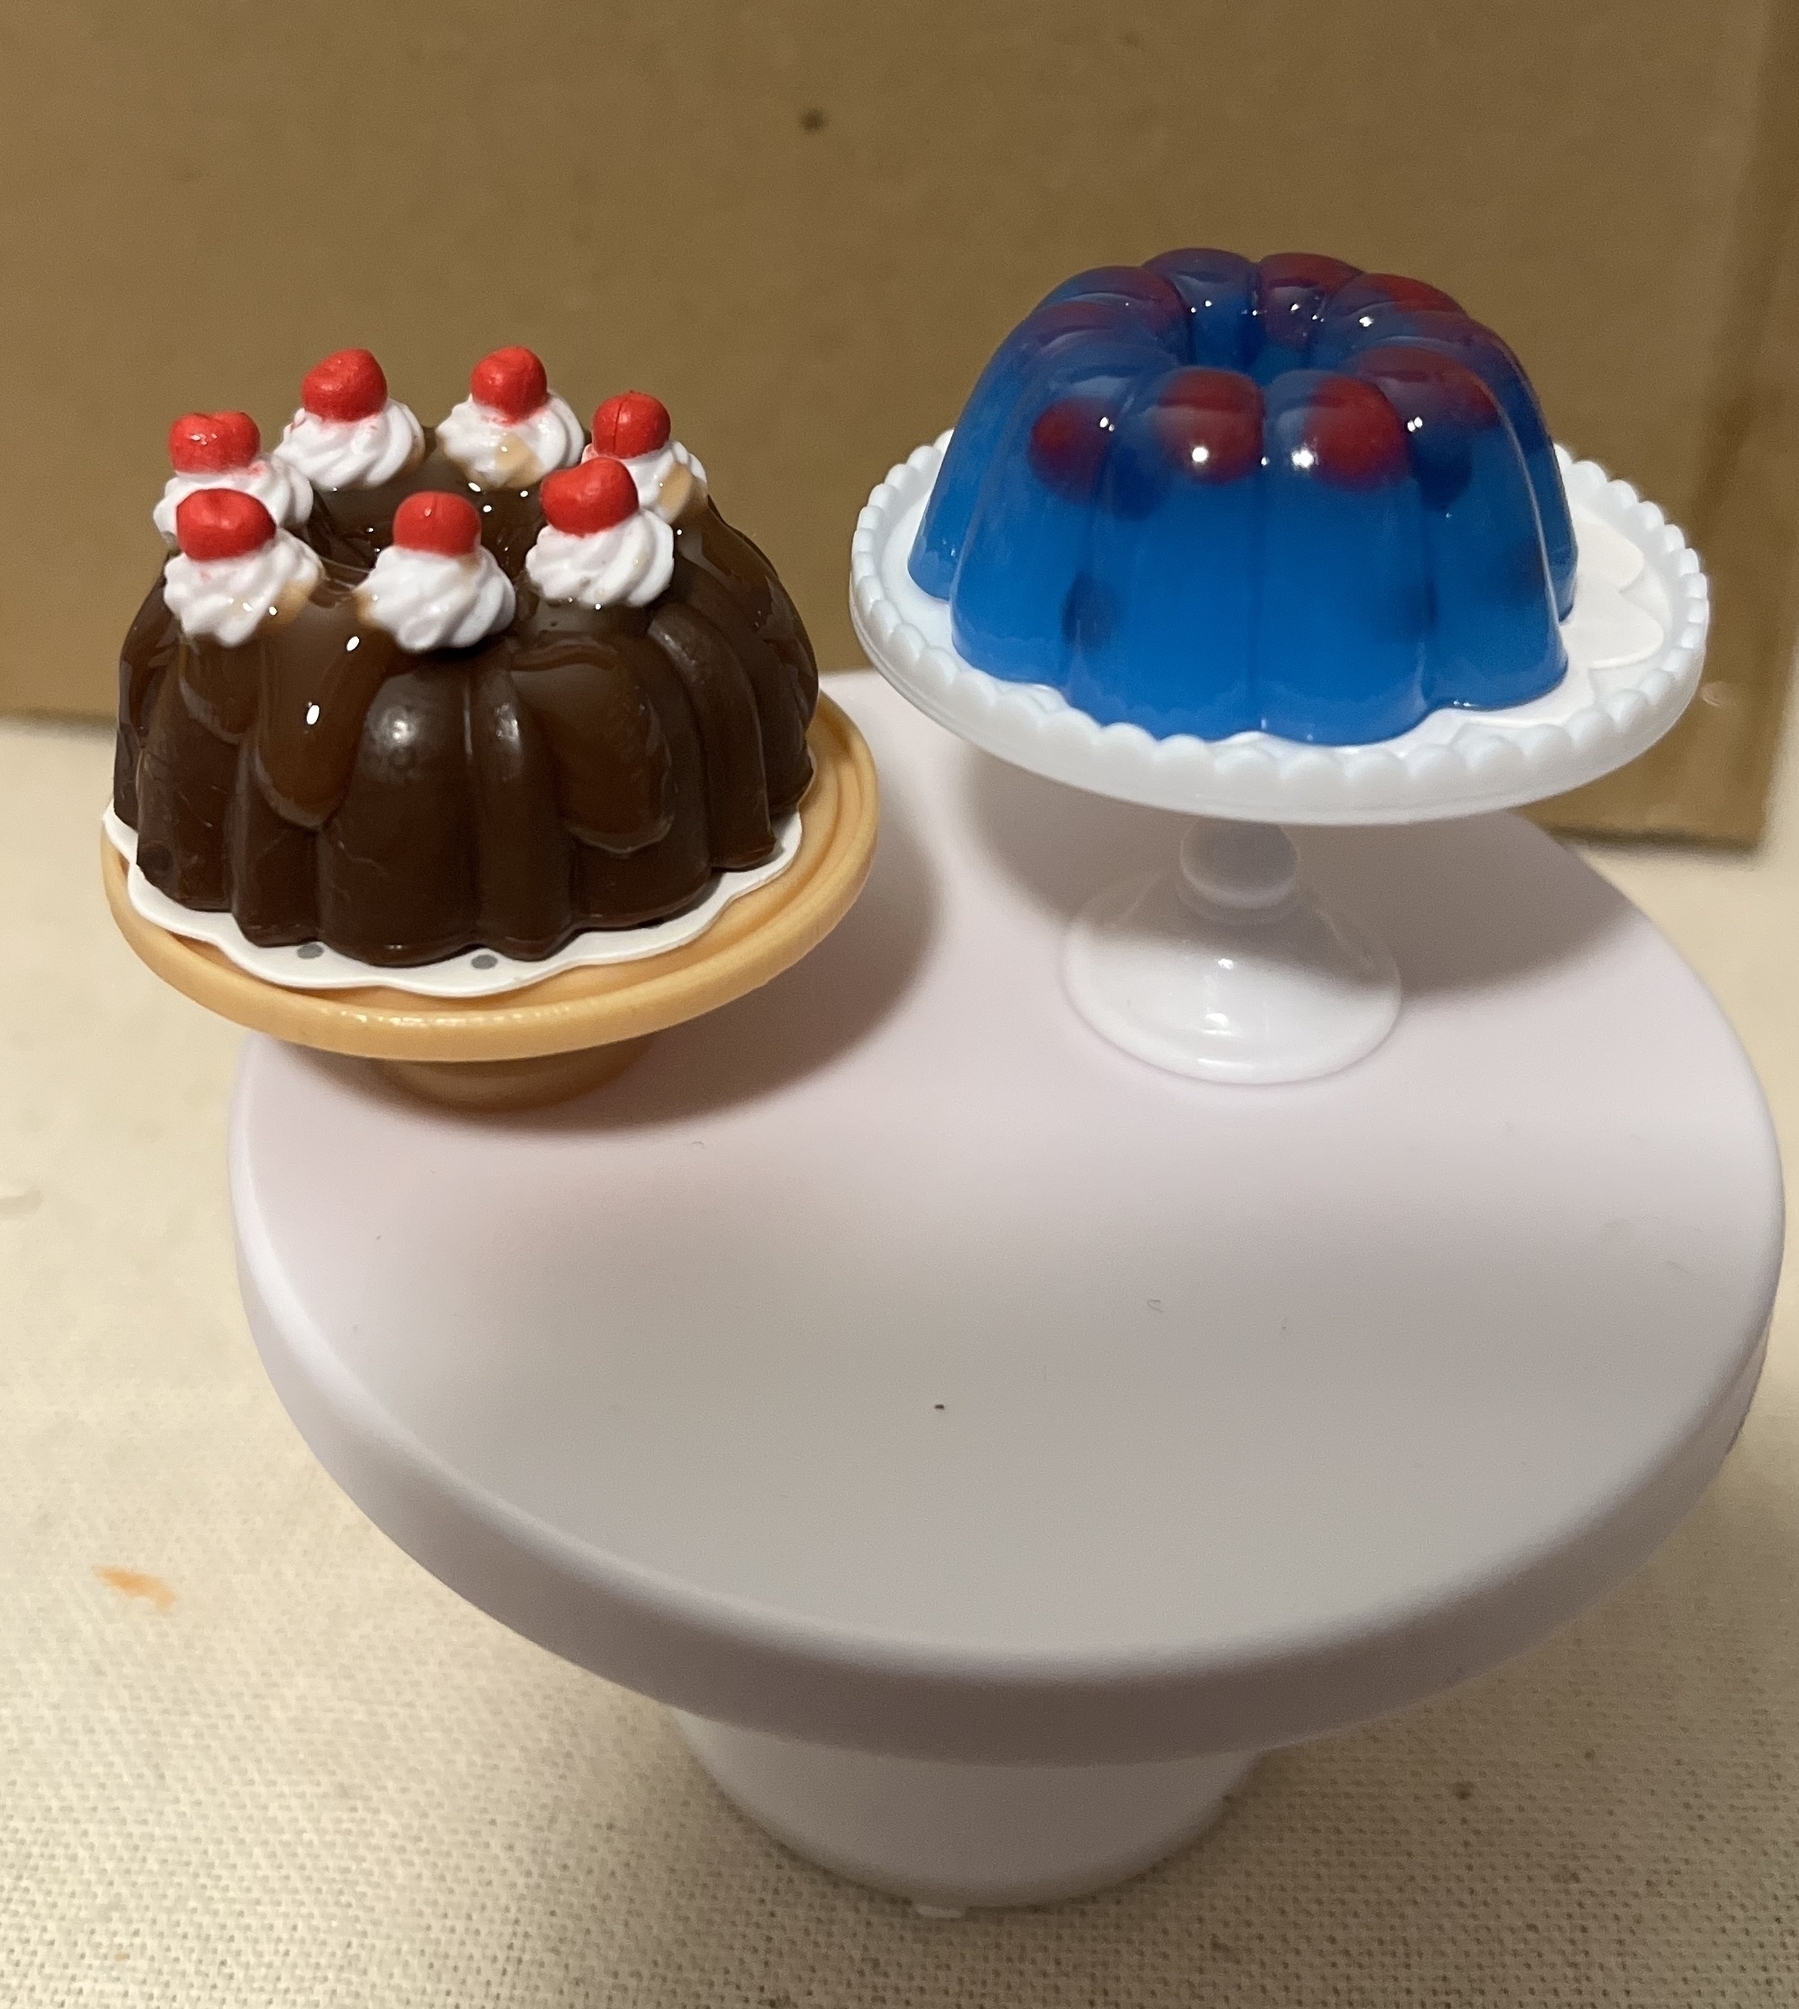 A toy chocolate bundt cake with white icing and red berries on a small plate, next to a toy blue gelatin dessert on a cake stand.